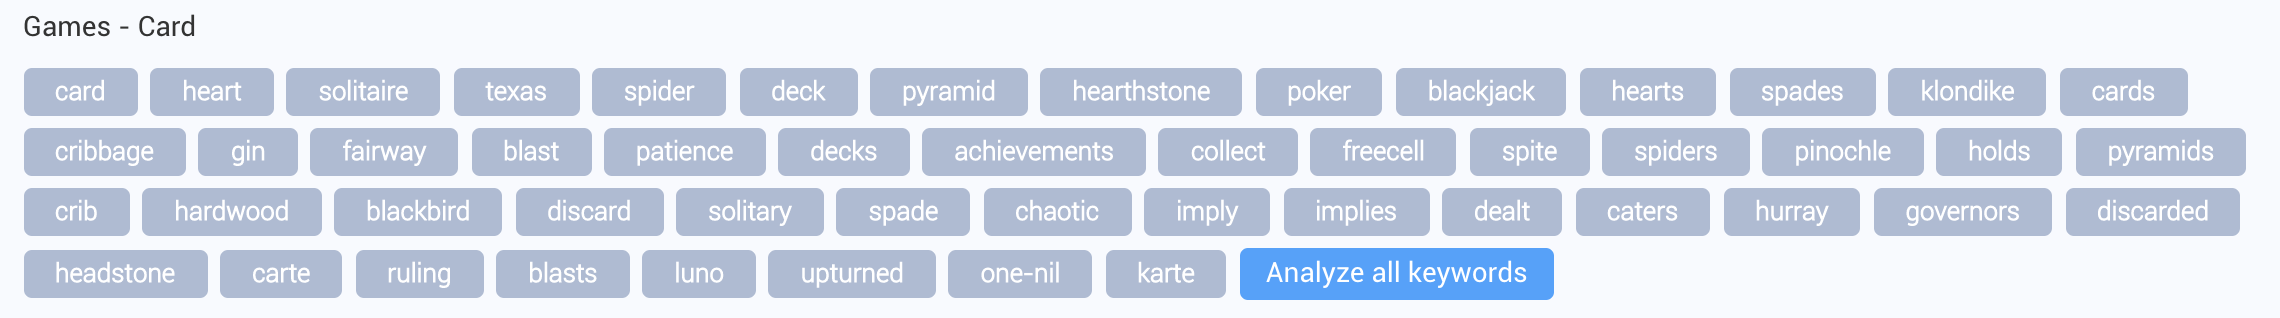 Top category keywords for the Games - Card category (Google Play US)